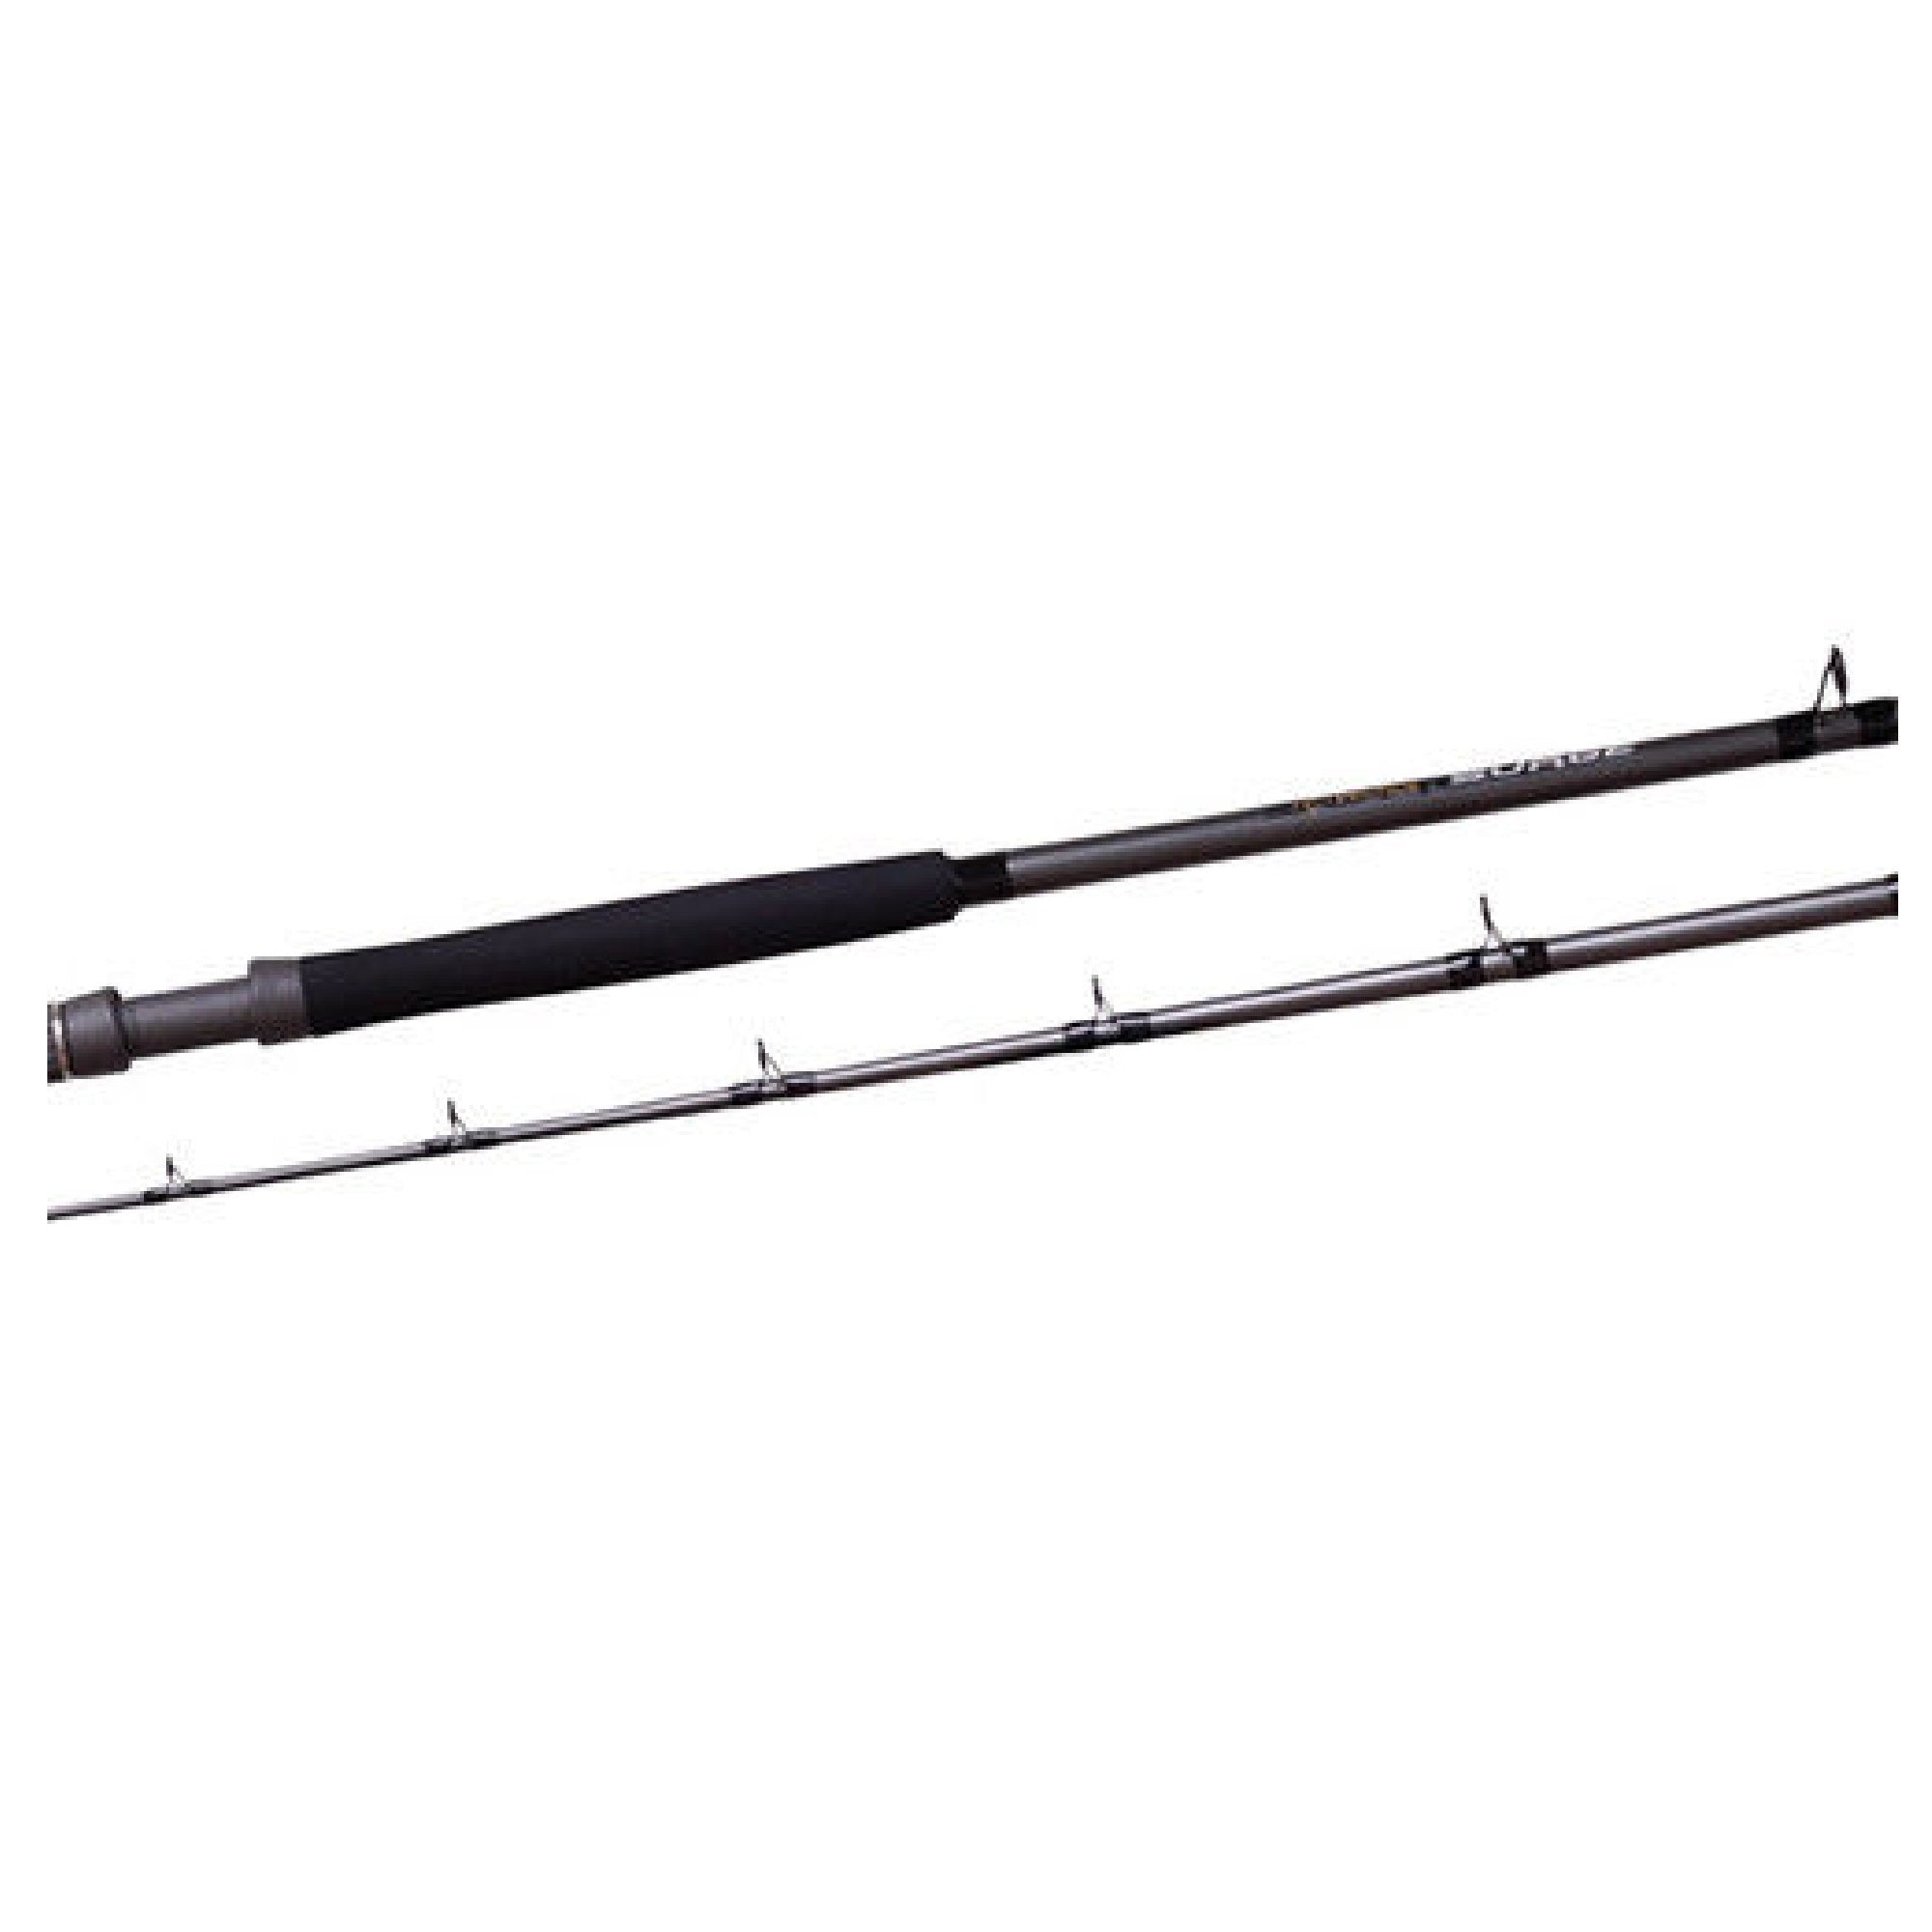 Fin-Nor Surge SaltWater Fishing Rods FSGS7040 7ft0in 30-50lb – The